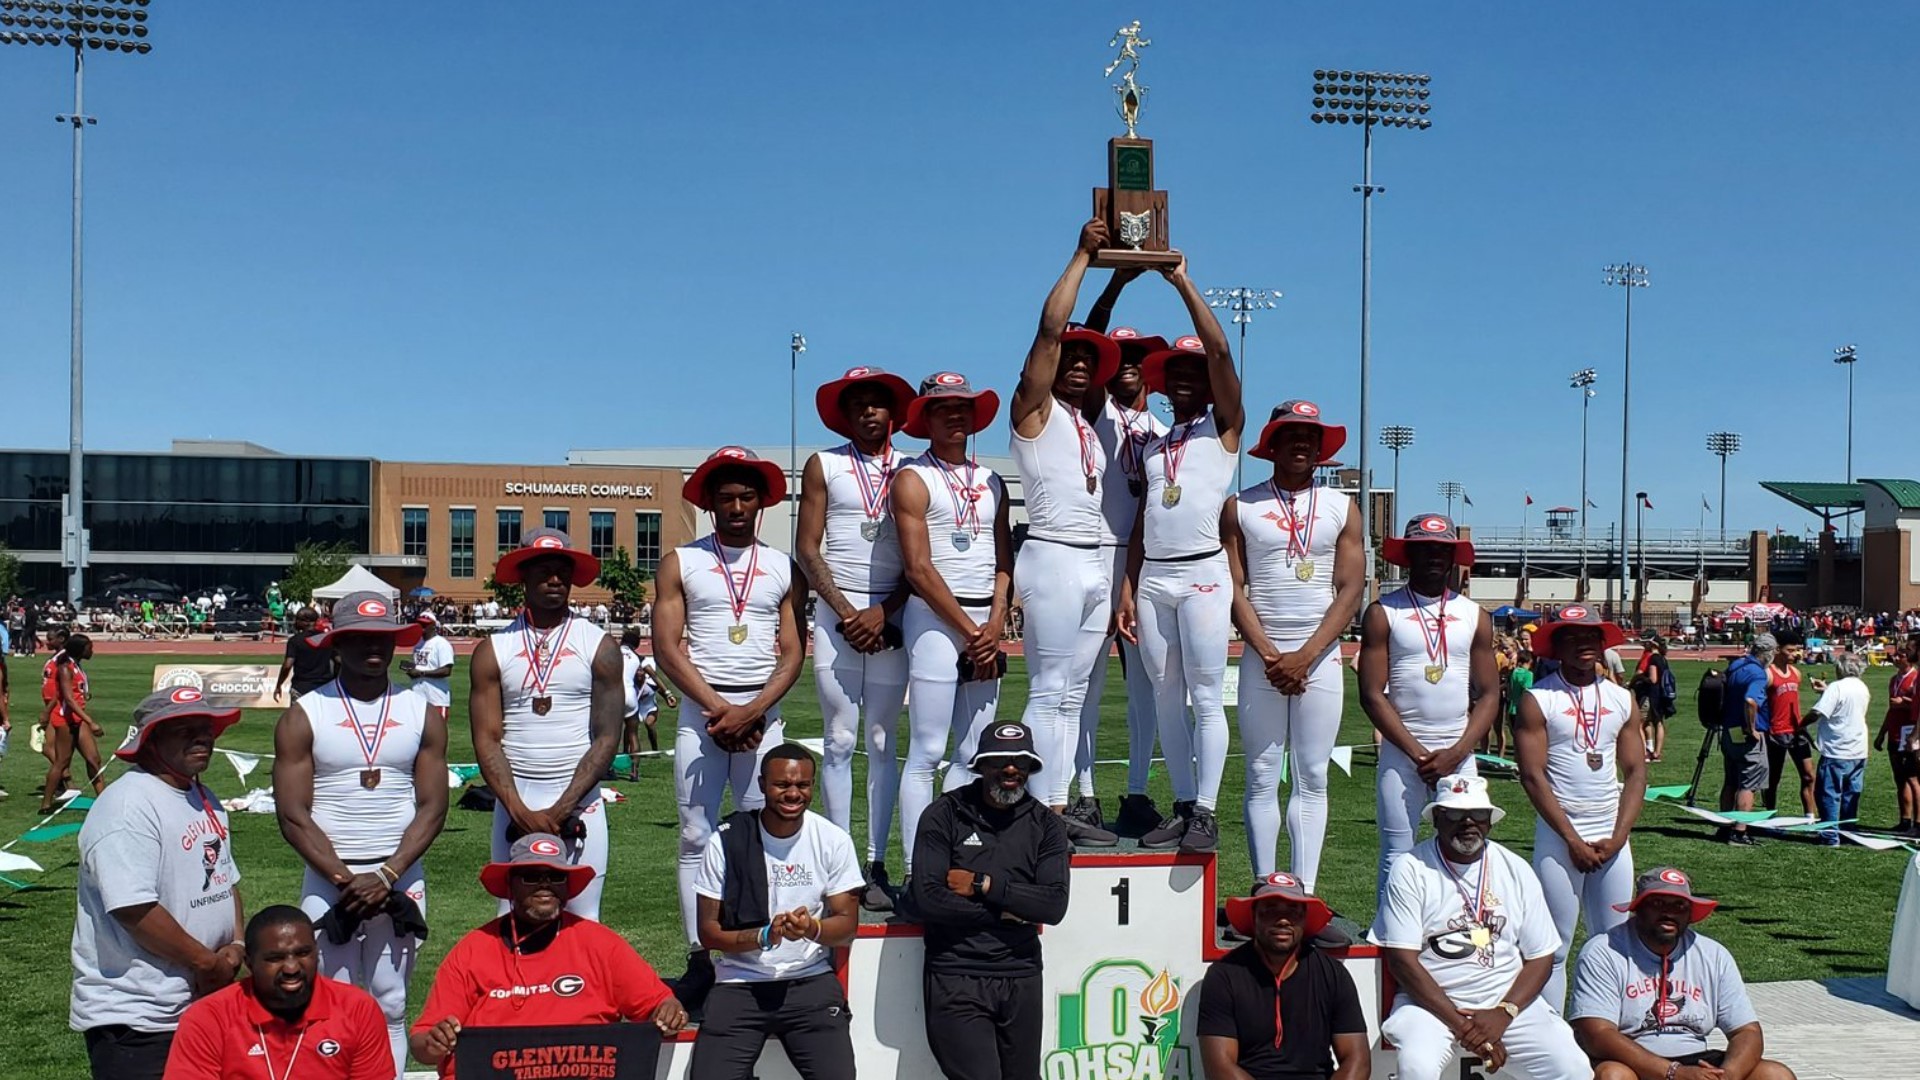 OHSAA track and field championships Winners from Northeast Ohio